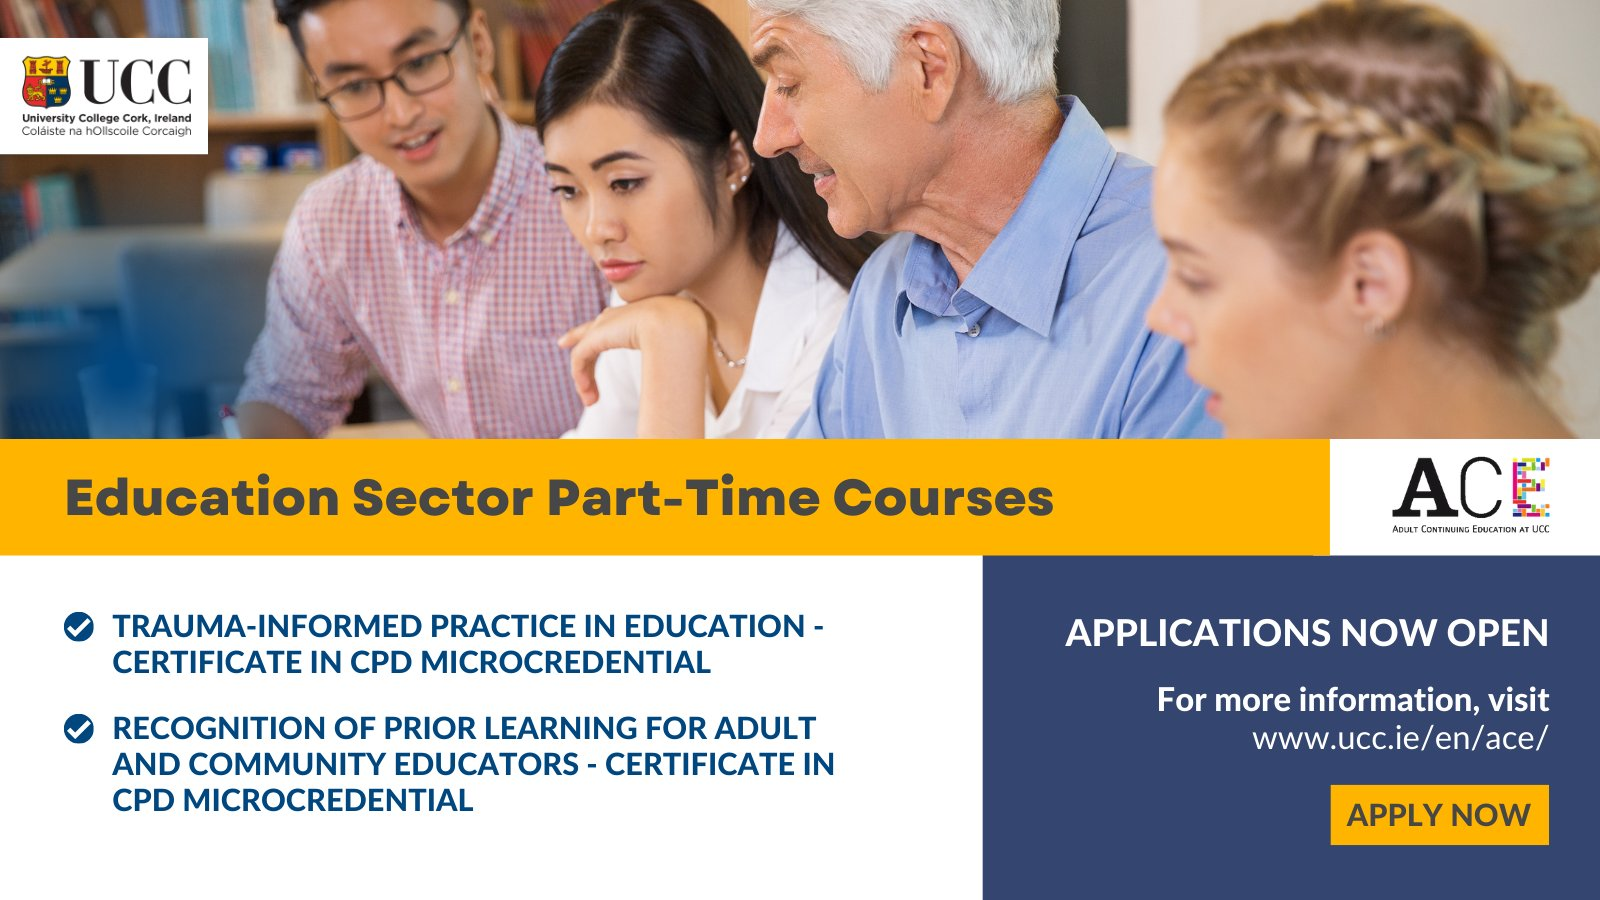 Education Sector Part Time Courses Open Now